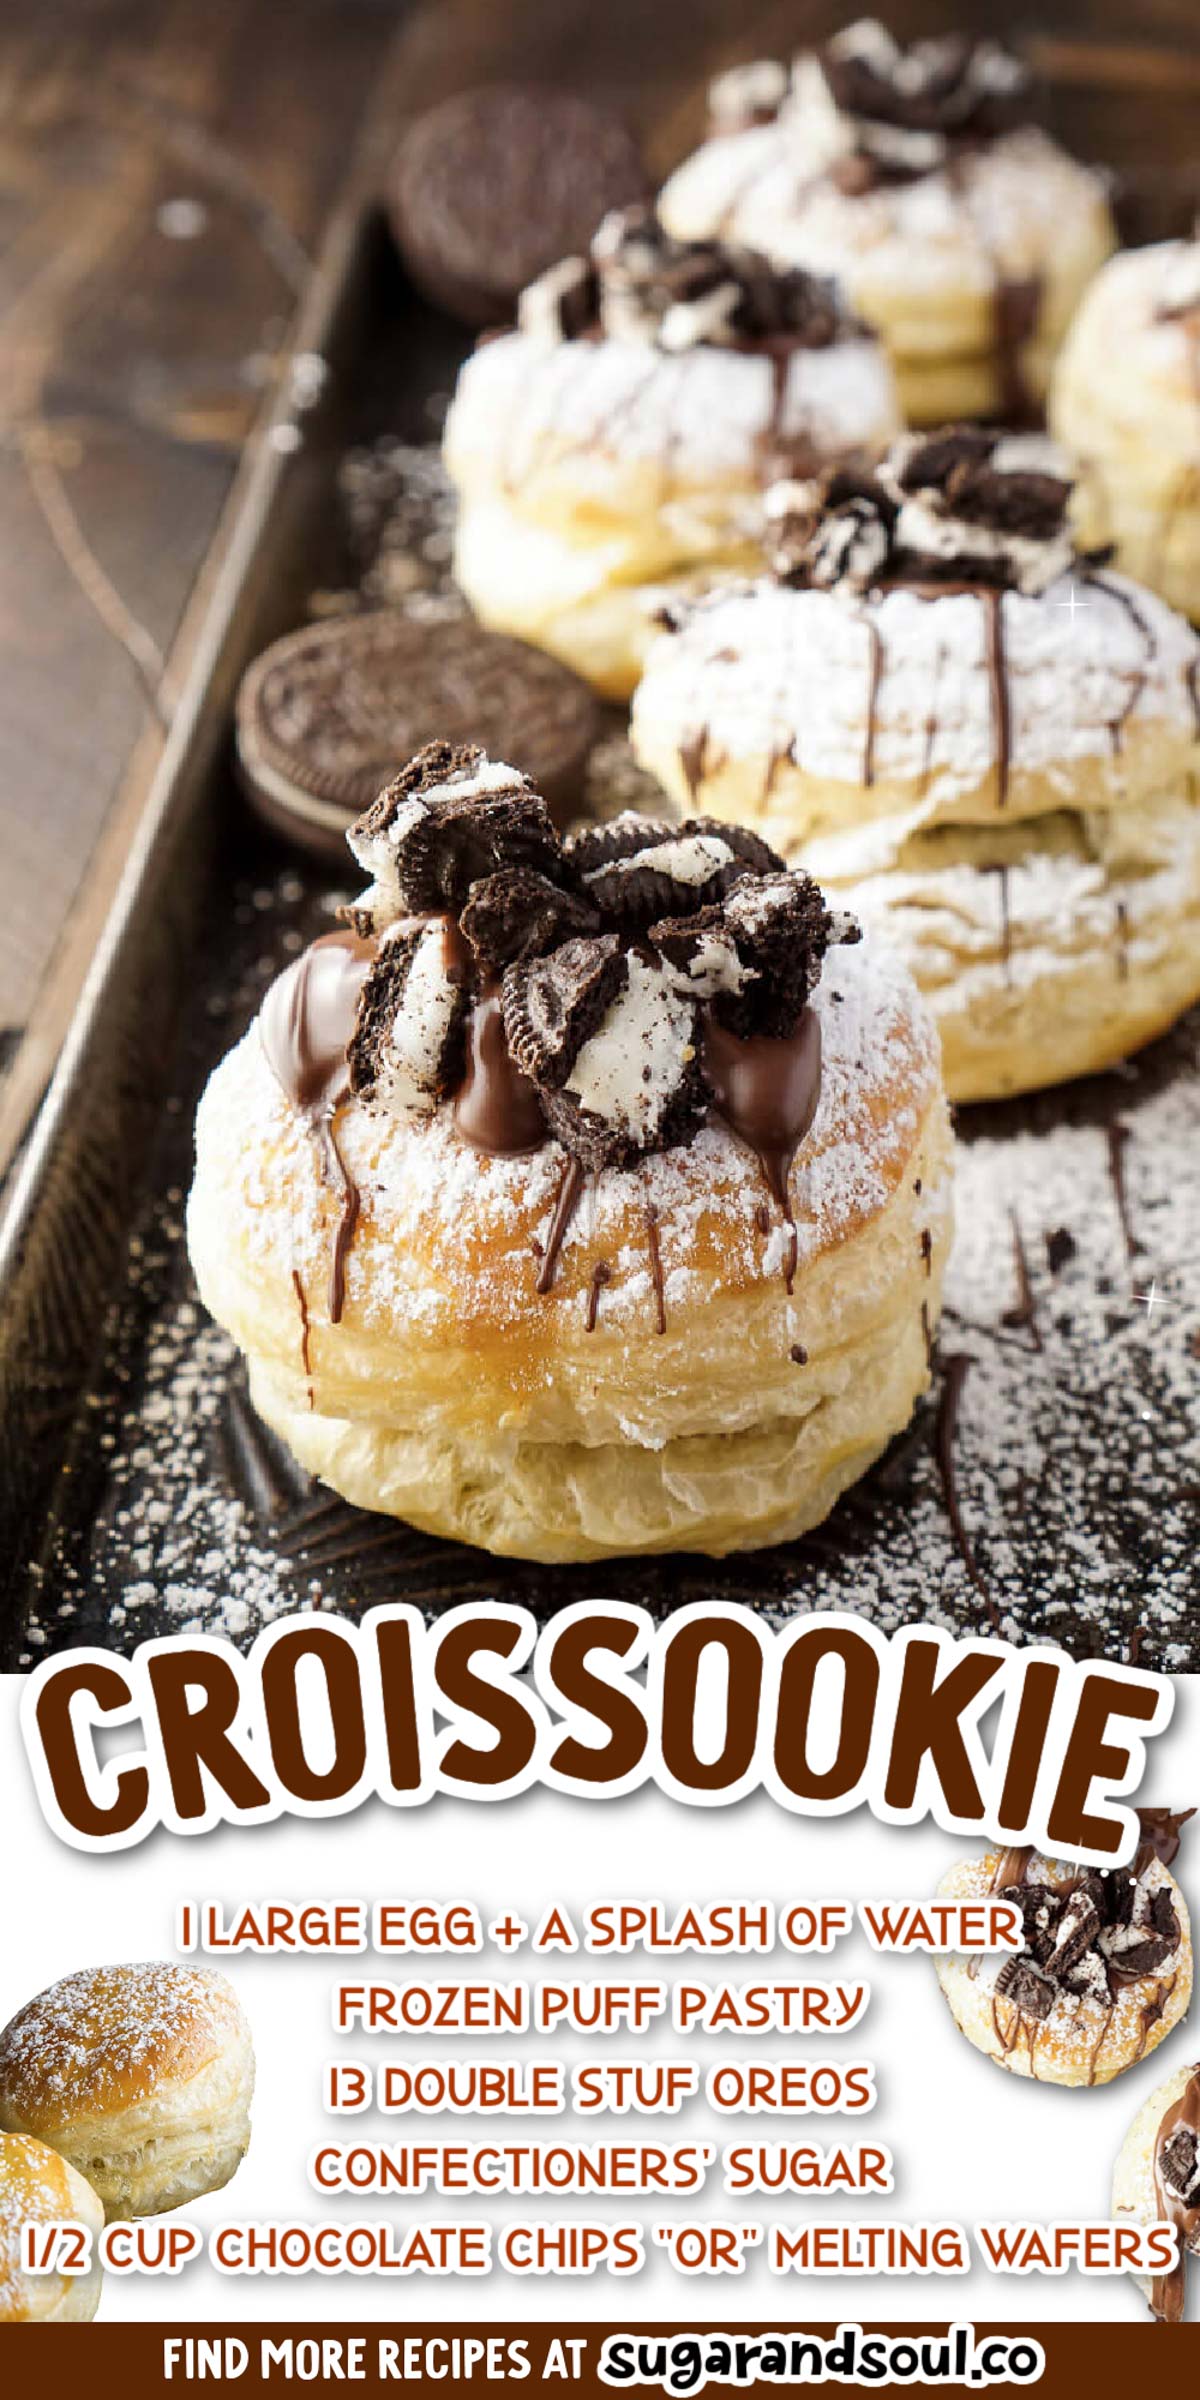 The Croissookie is a decadent pastry dessert that's so much easier to make at home than it looks! Made with puff pastry dough, Oreos, and powdered sugar, it's an easy but impressive treat! via @sugarandsoulco